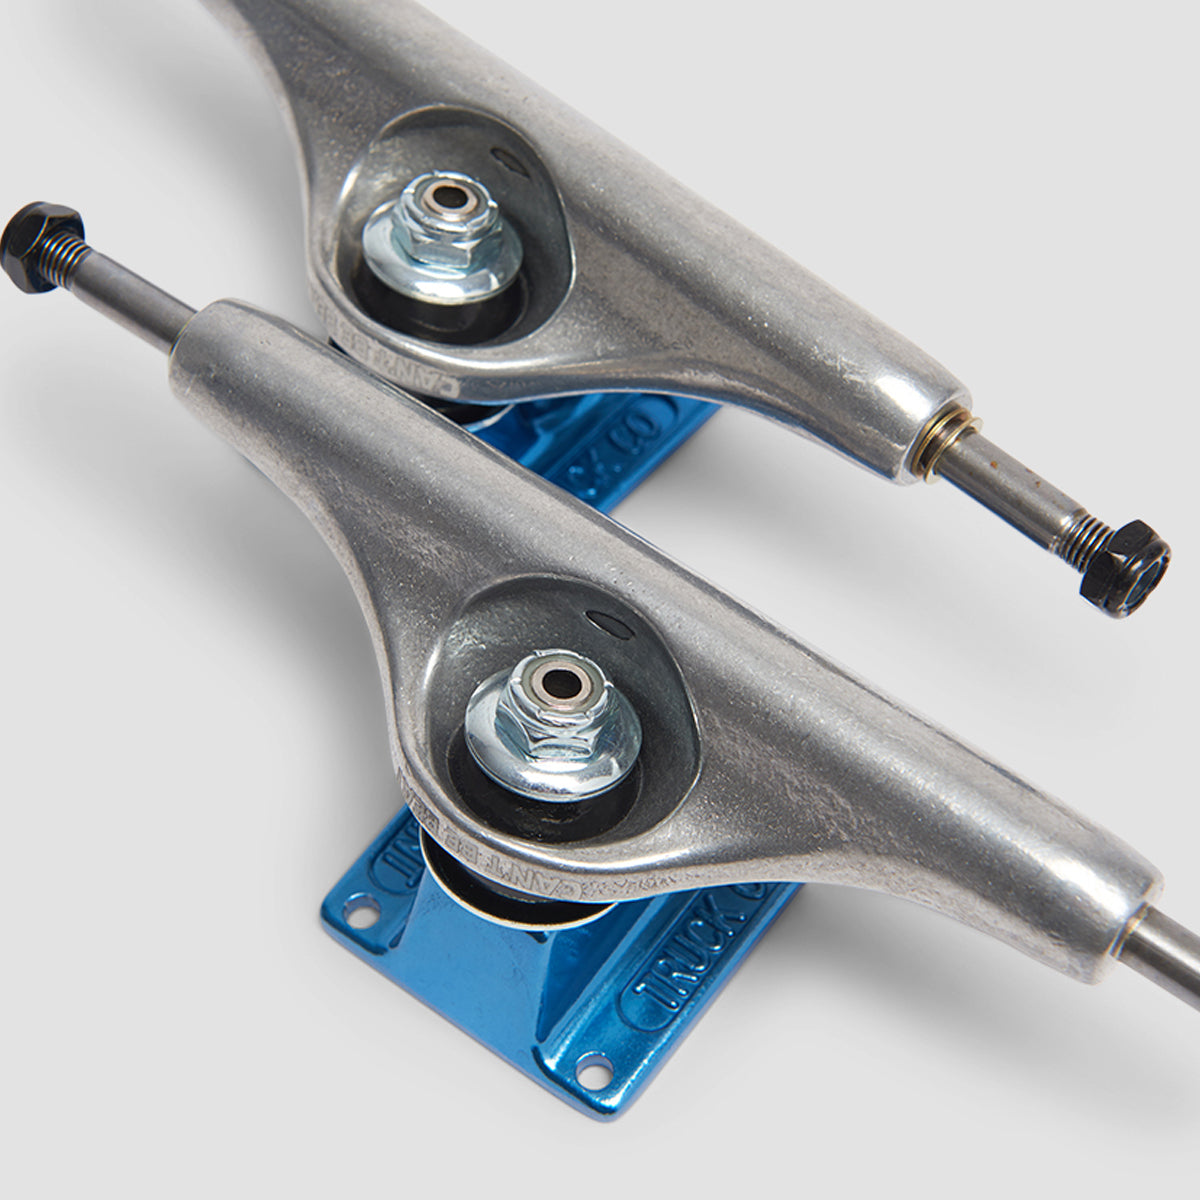 Independent Stage 11 144 Forged Hollow Cant Be Beat 78 Skateboard Trucks 1 Pair Silver/Blue - 8.25"